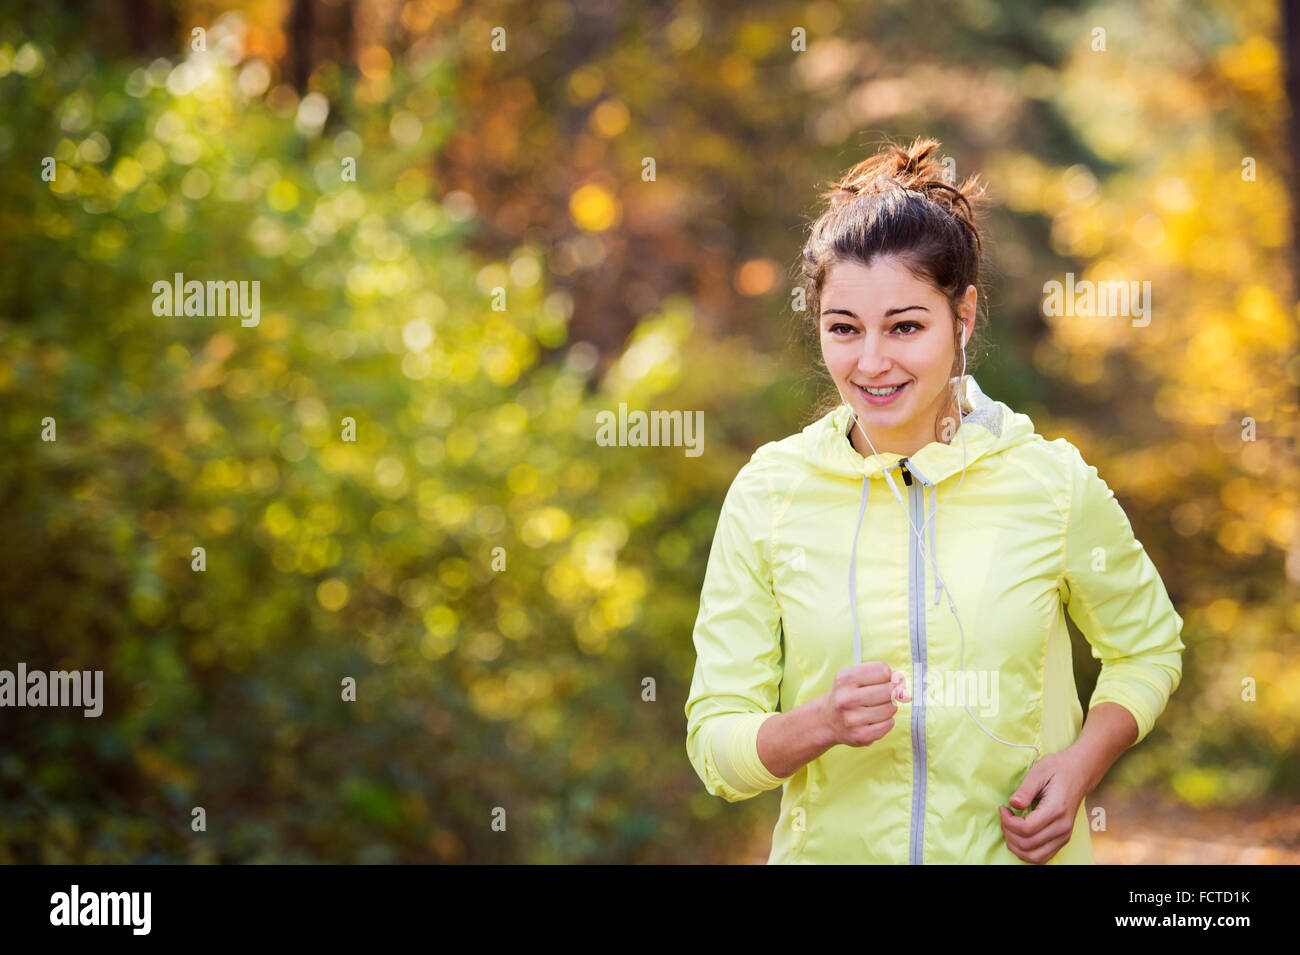 Young woman running Stock Photo